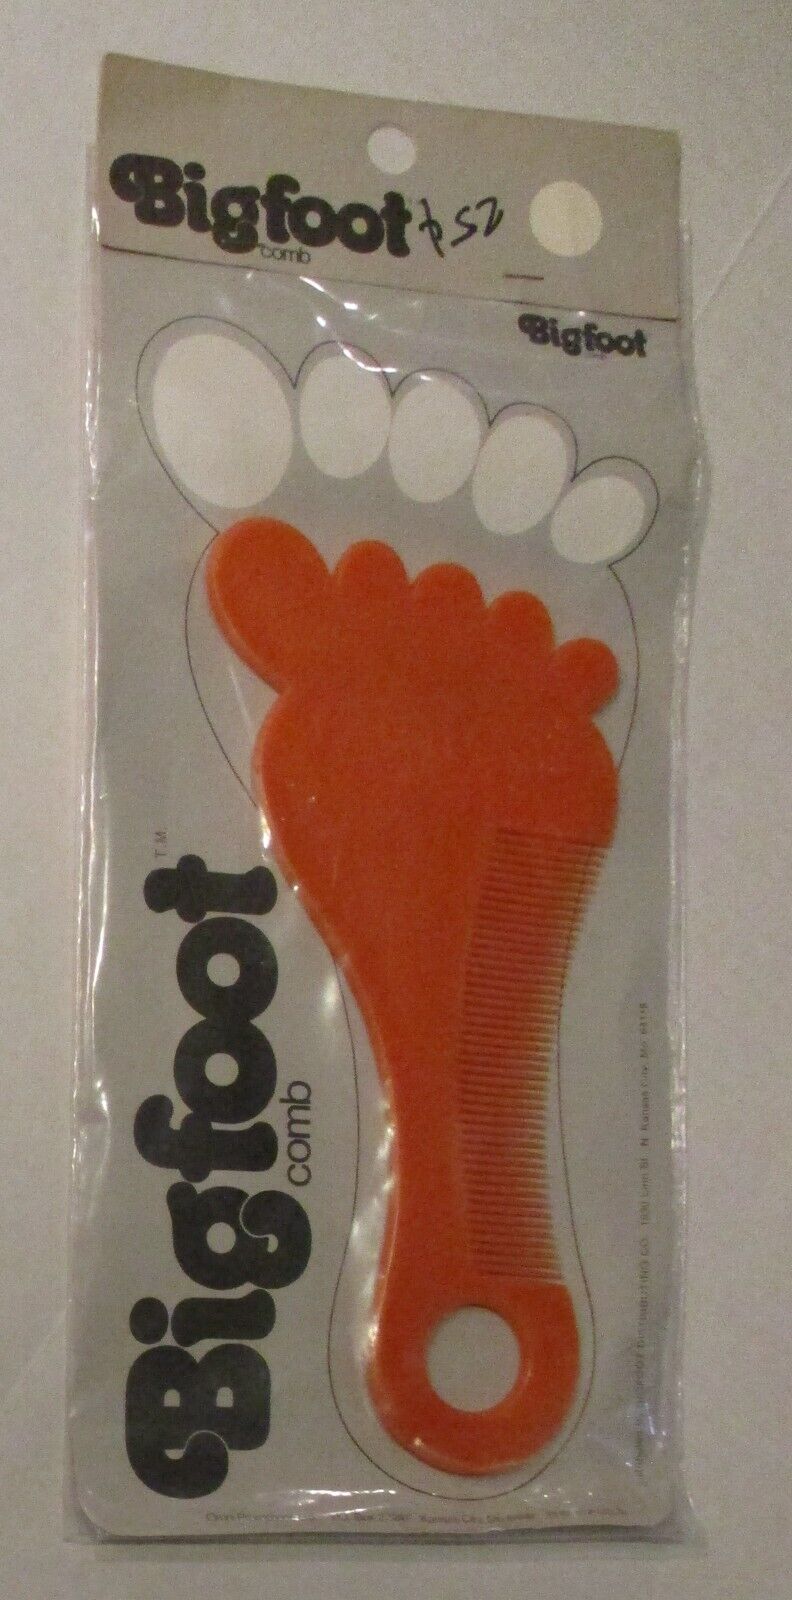 Vintage 1980's Bigfoot Comb Orange NEW IN PACK 9 Inch Retro Weird Collectible